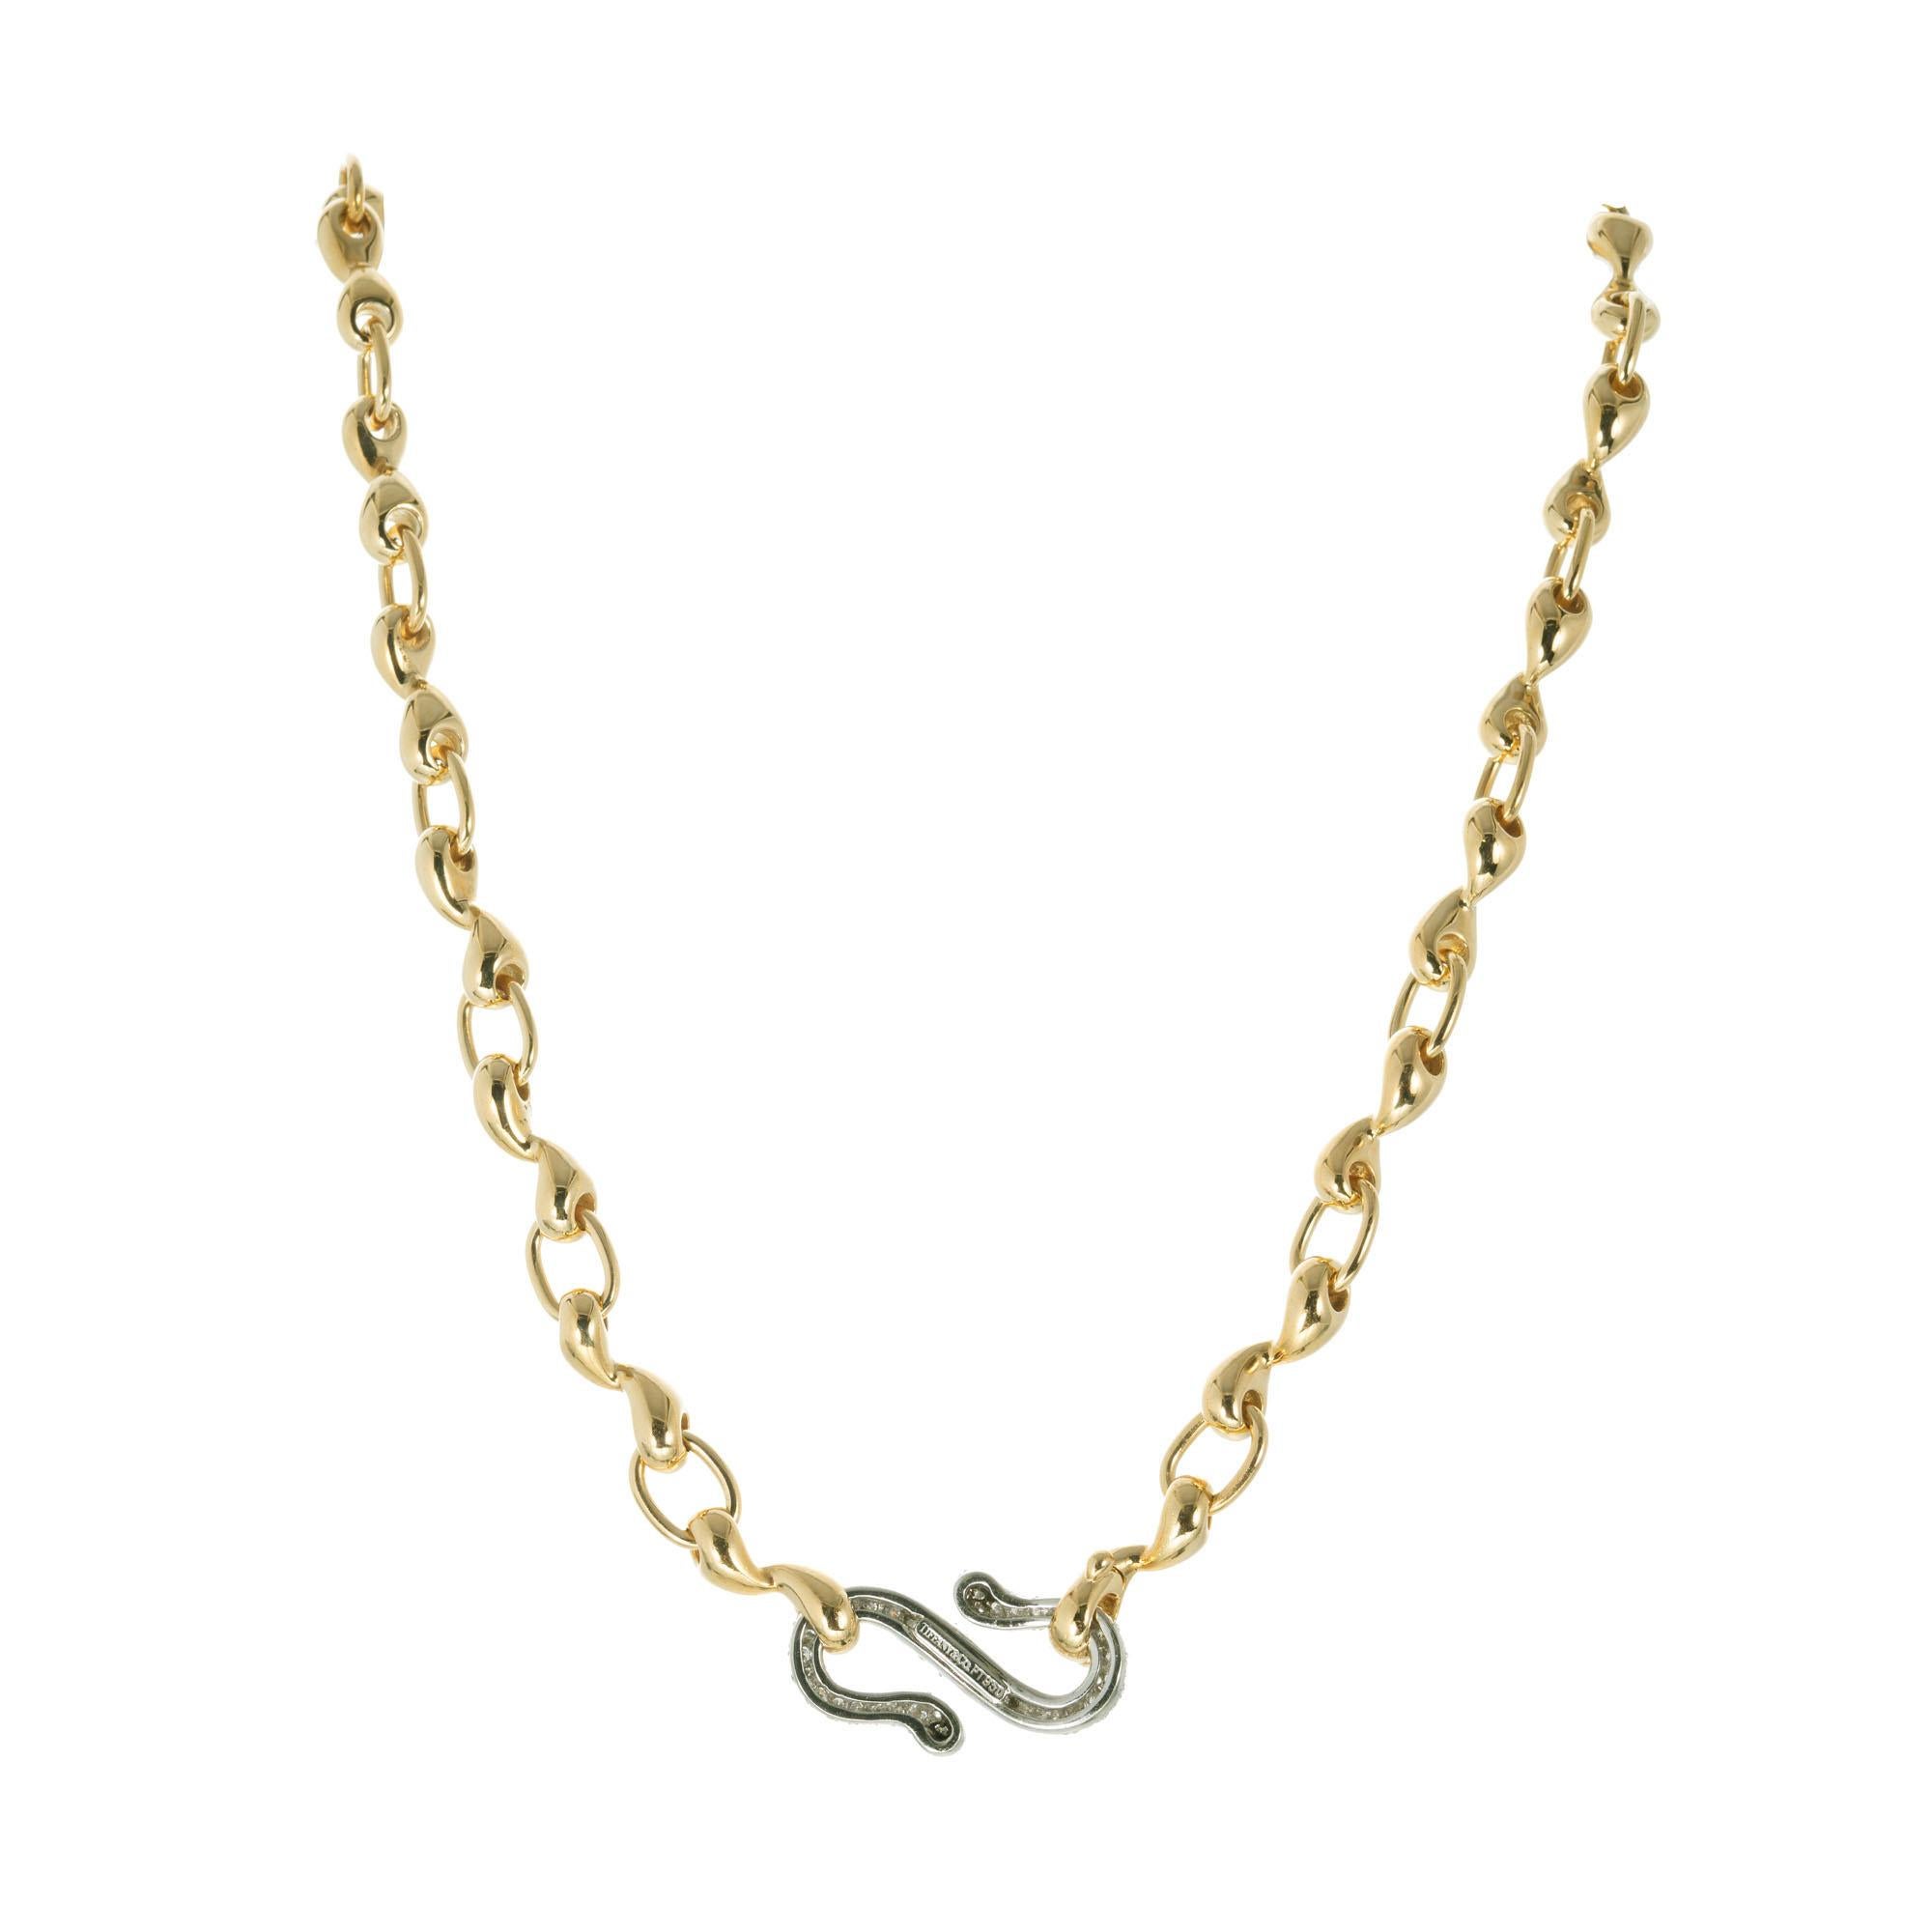 Tiffany & Co swirl link 18k yellow gold necklace with at platinum swirl center section with pave diamonds. 

90 brilliant-cut diamonds F-G, VS, approx. 1.20cts
Length: 17 Inches
18k yellow gold 
Platinum 
Stamped: PT 950 750
Hallmark: Tiffany &